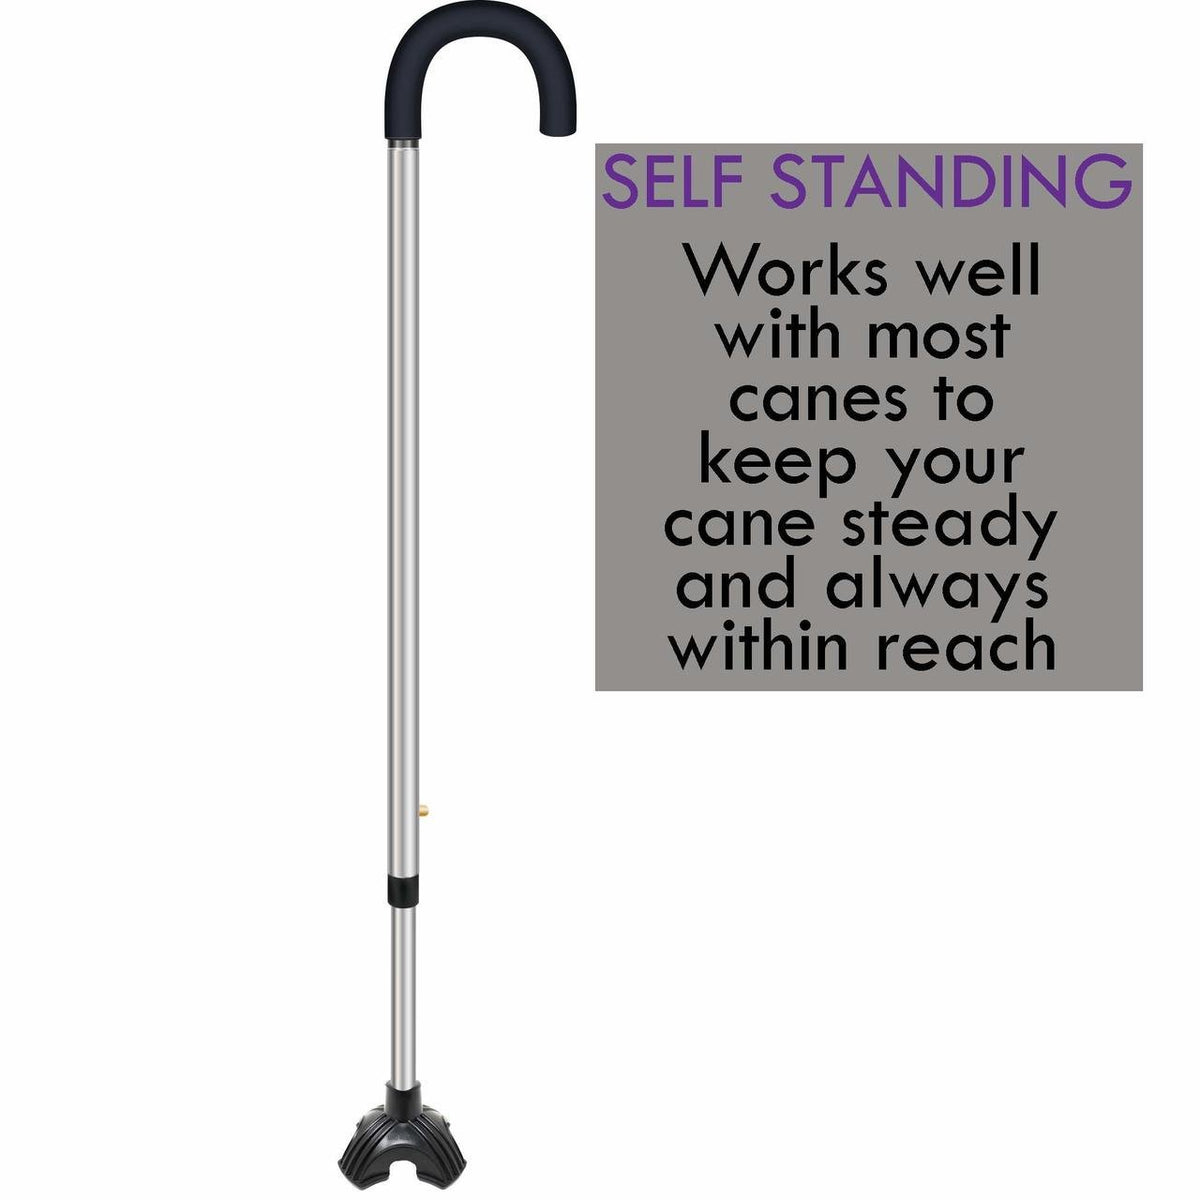 Standing Quad Cane Tip - Quadruple Tripod Replacement Walking Stick Standing Cane Tip for Walking Canes - Self Standing - Stabilize - Universal 4 Leg Attachment - by Mars Wellness - Mars Med Supply